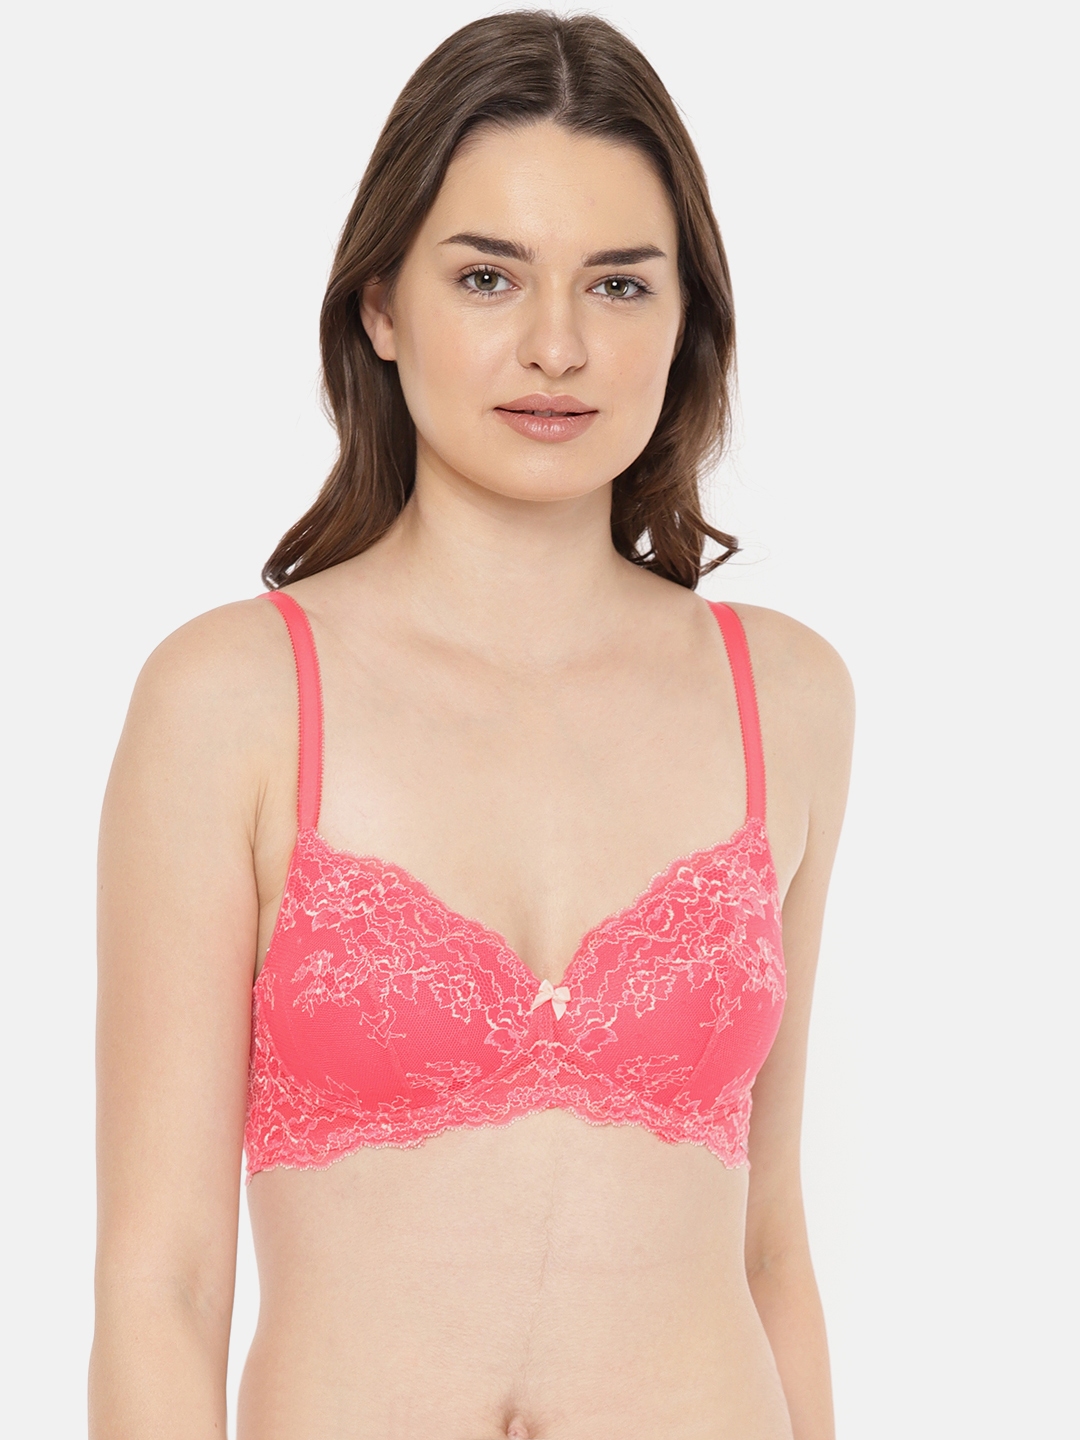 Buy Amante Padded Wirefree Lace Delight Bra BRA30501 - Bra for